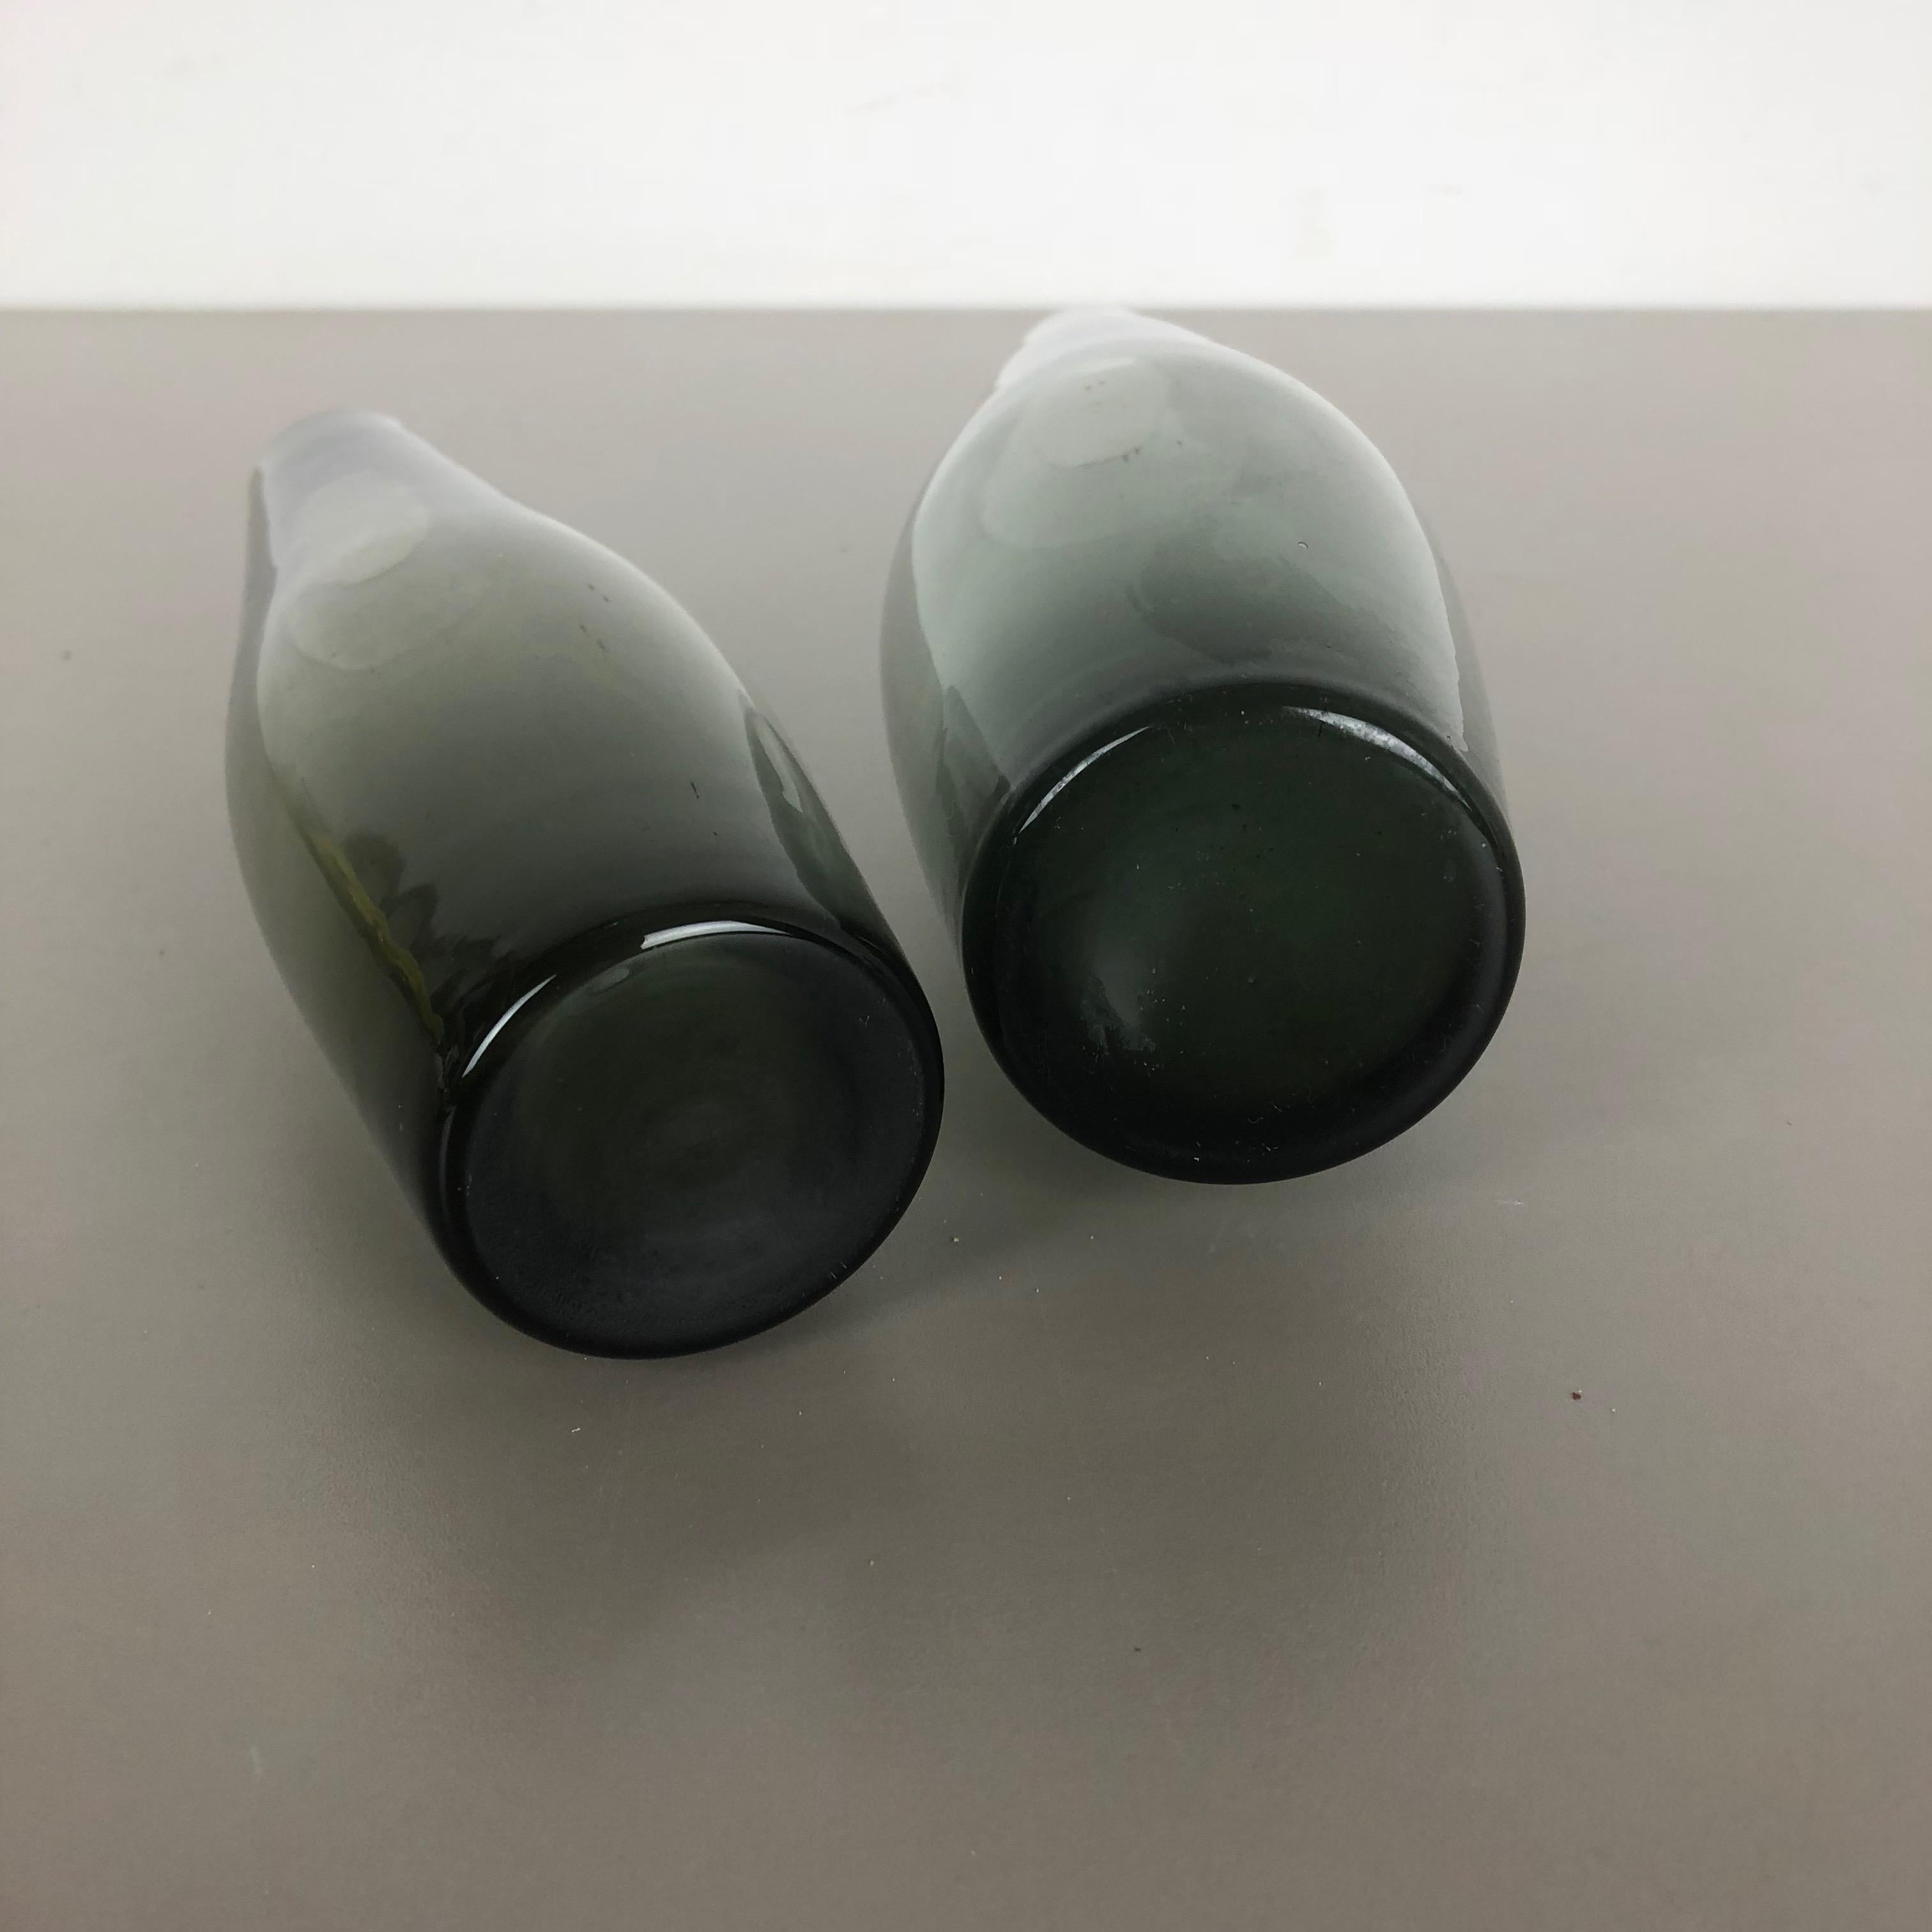 Vintage 1960s Set of 2 Turmaline Vases by Wilhelm Wagenfeld for WMF, Germany For Sale 3